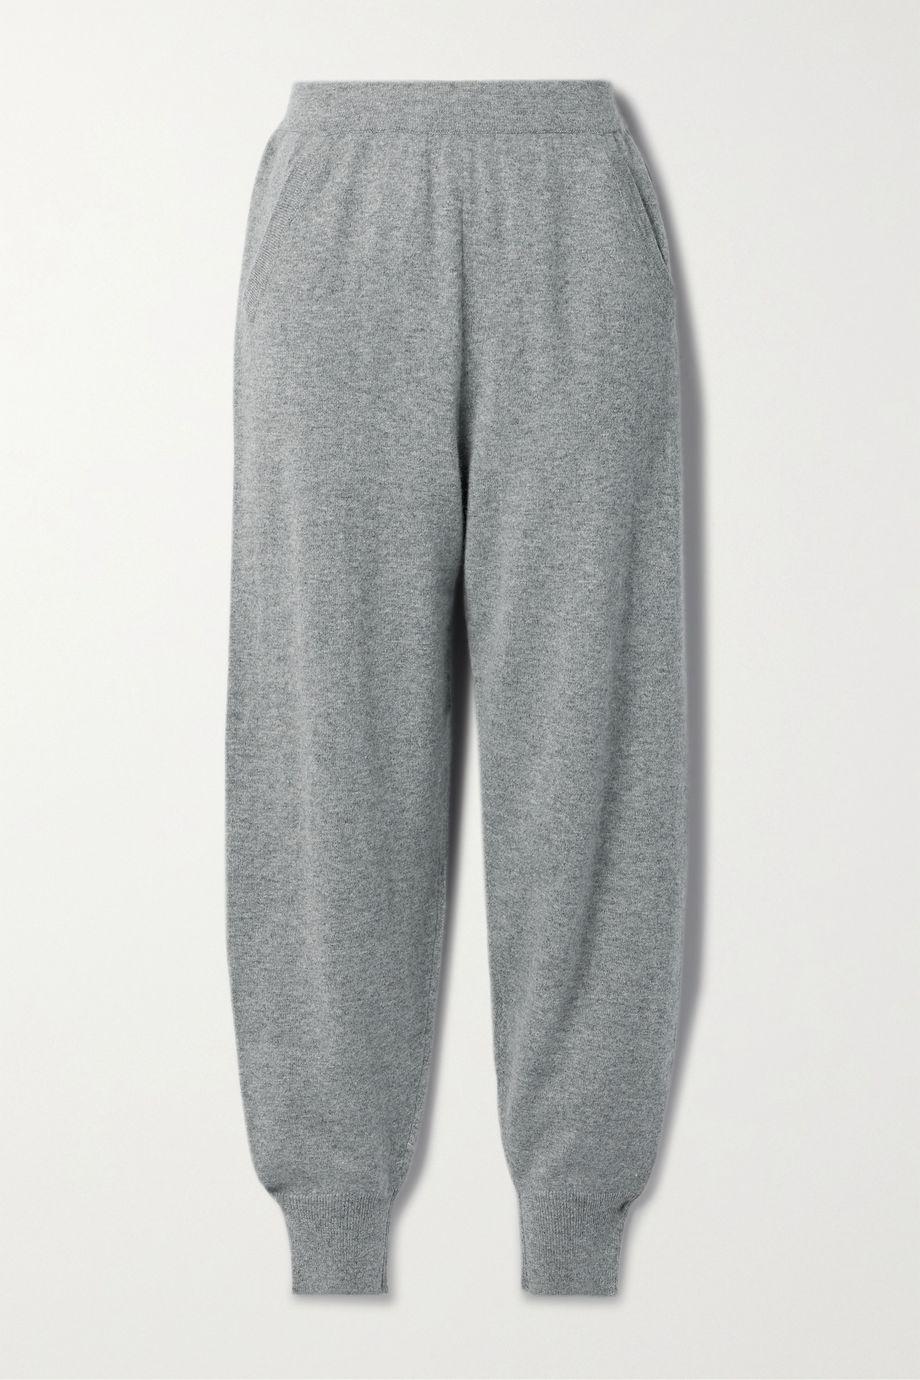 Cashmere track pants by ALLUDE